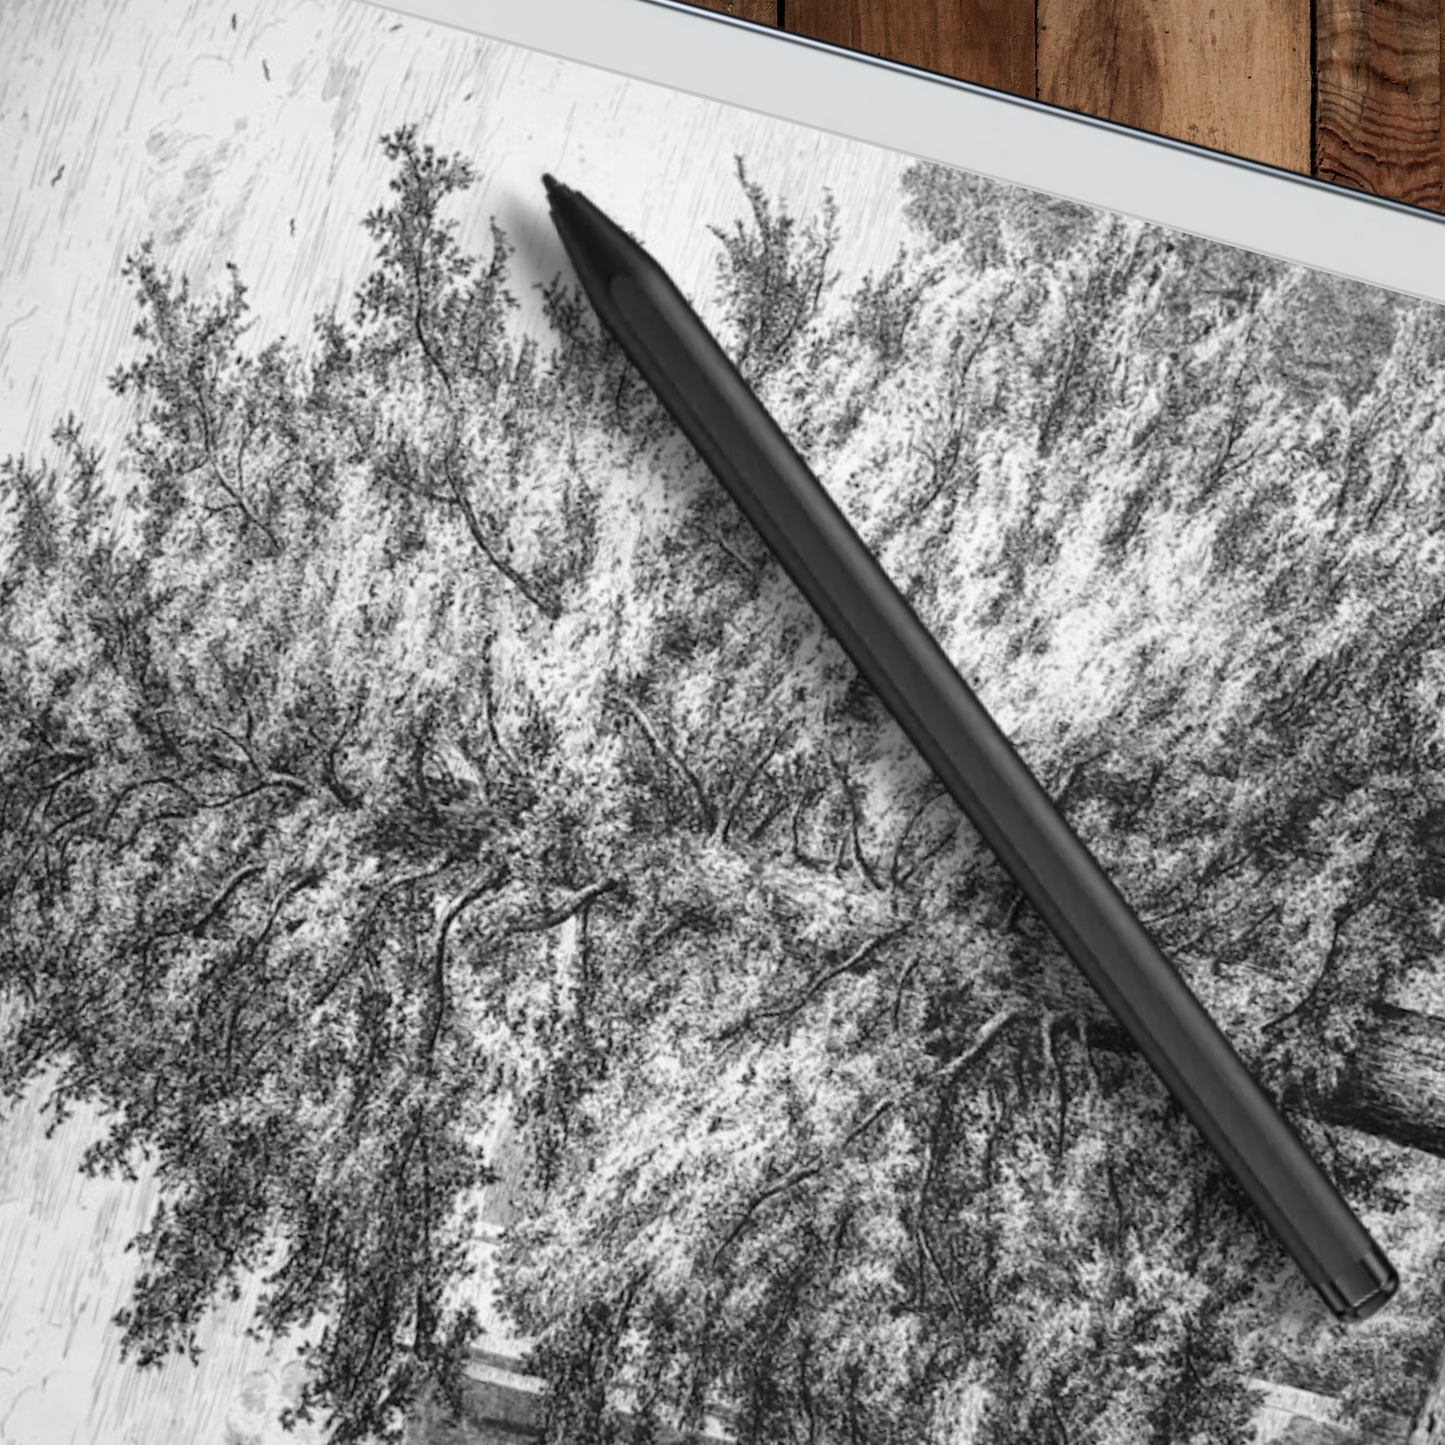 Remarkable 2 Sleep Screen & Notebook Cover Artwork - Artistic Foliage Drawings Created by Hand